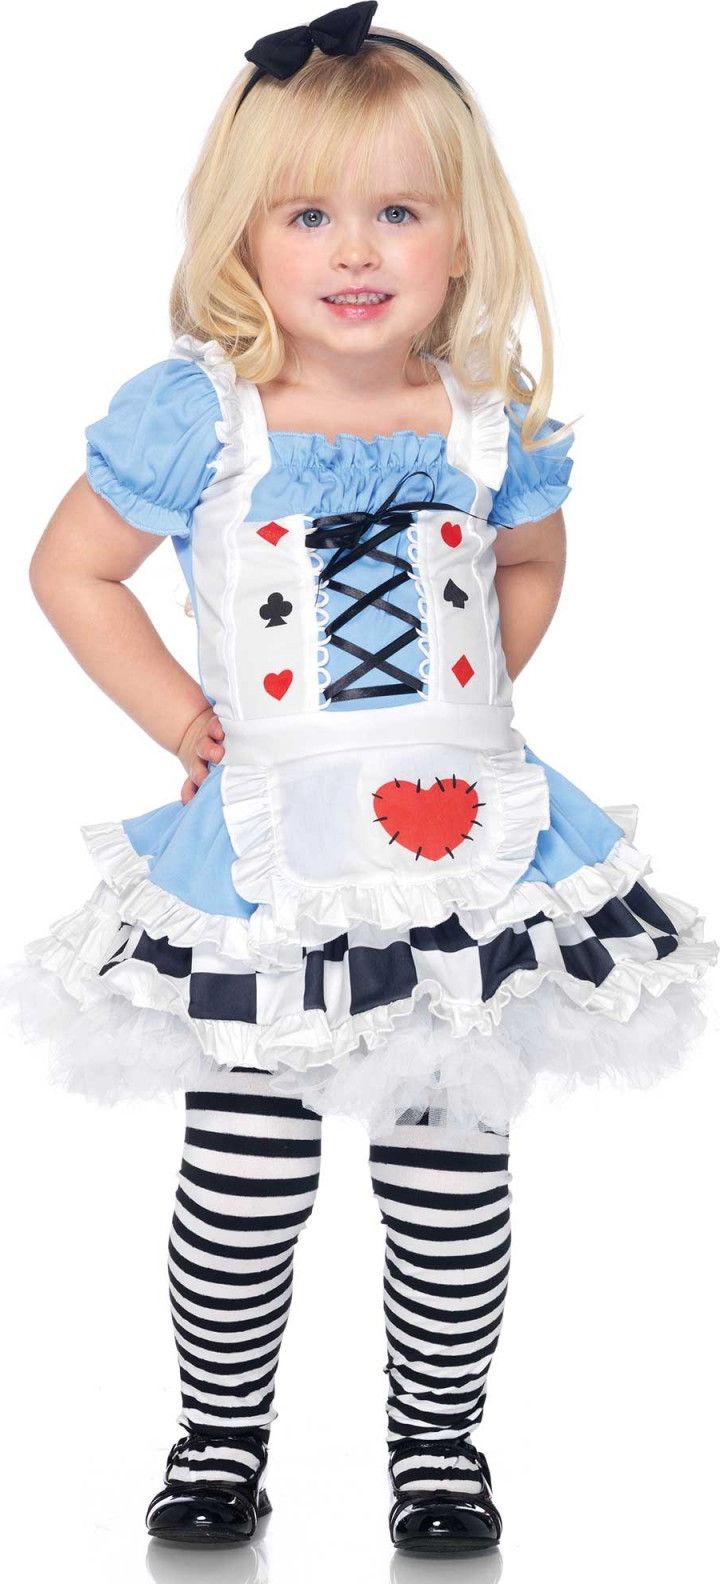 Alice in wonderland outfit